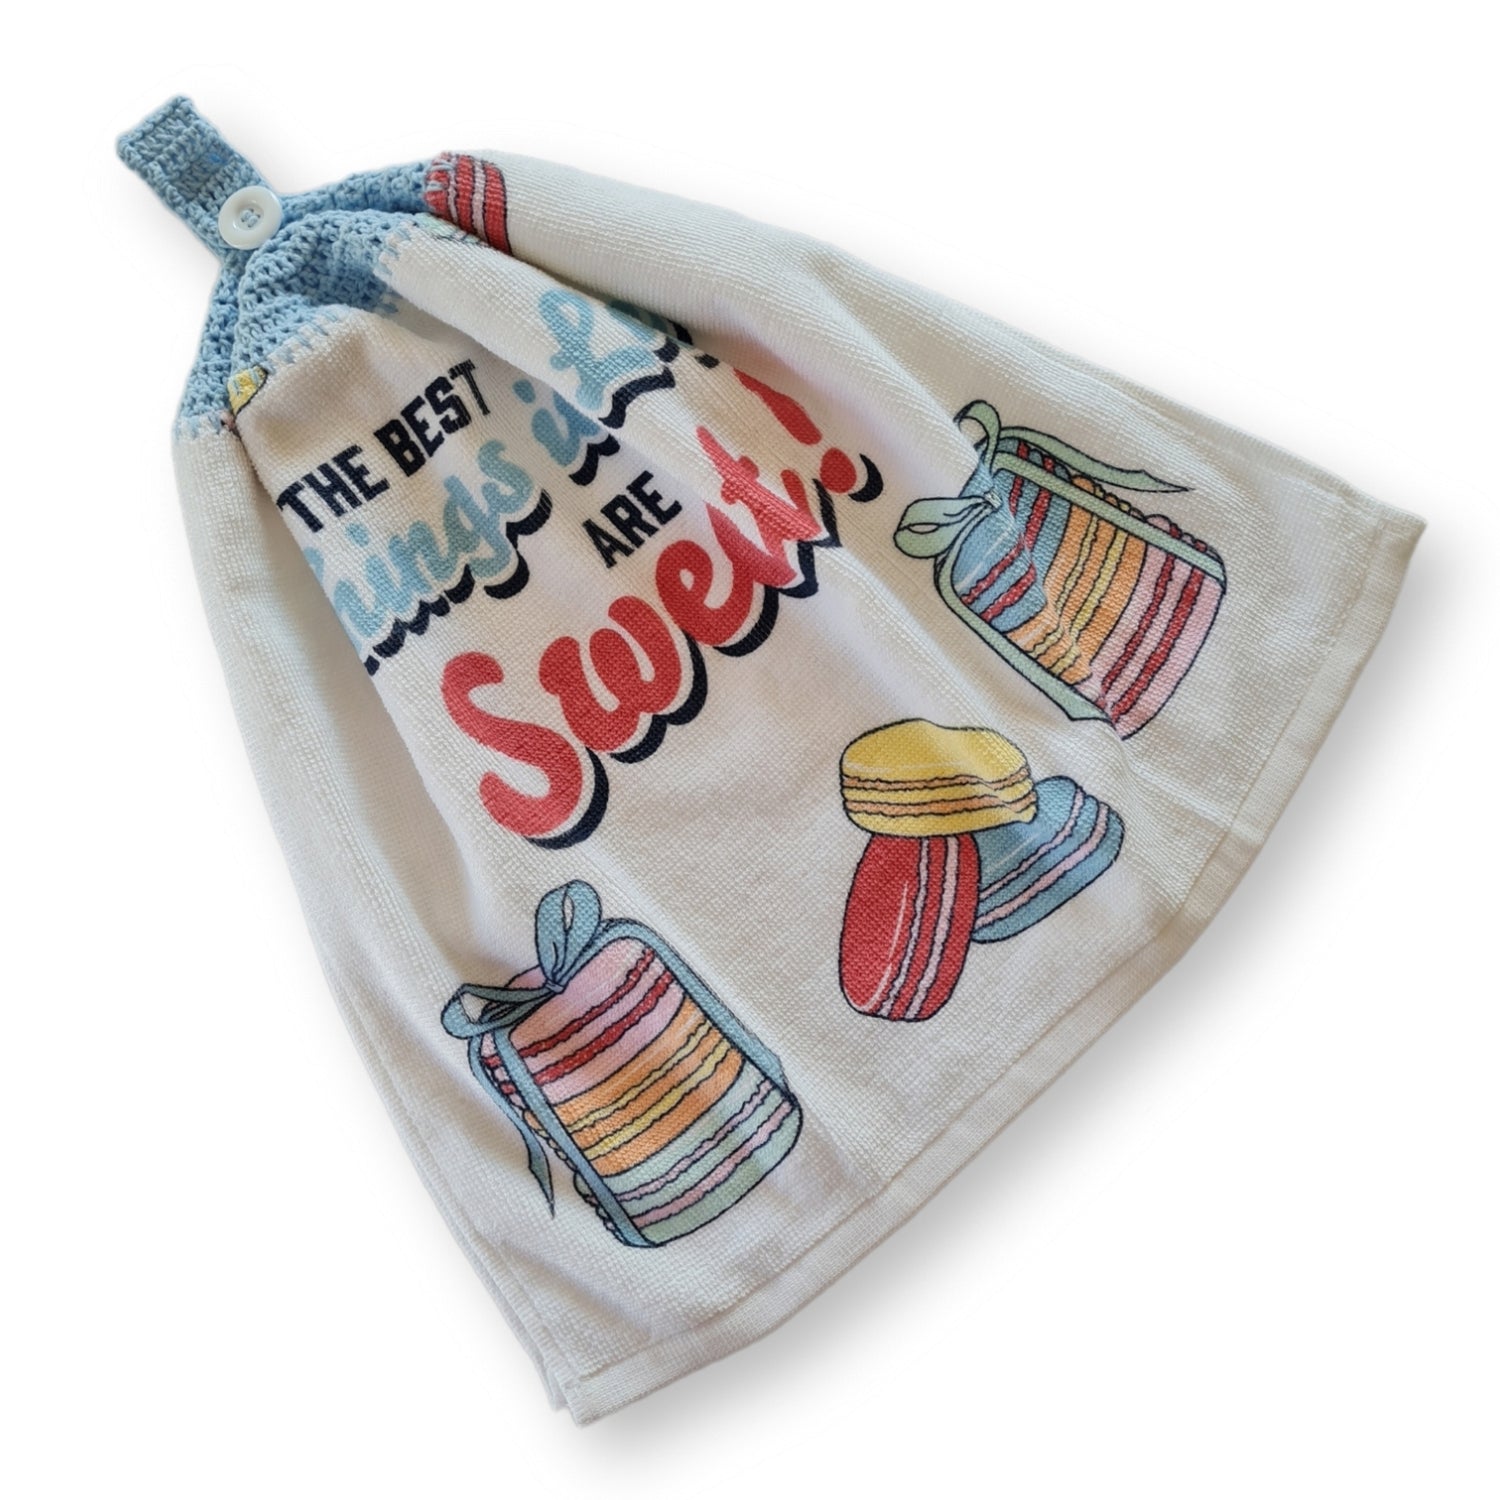 Crochet topped hanging kitchen hand towel - The Best Things in Life are Sweet